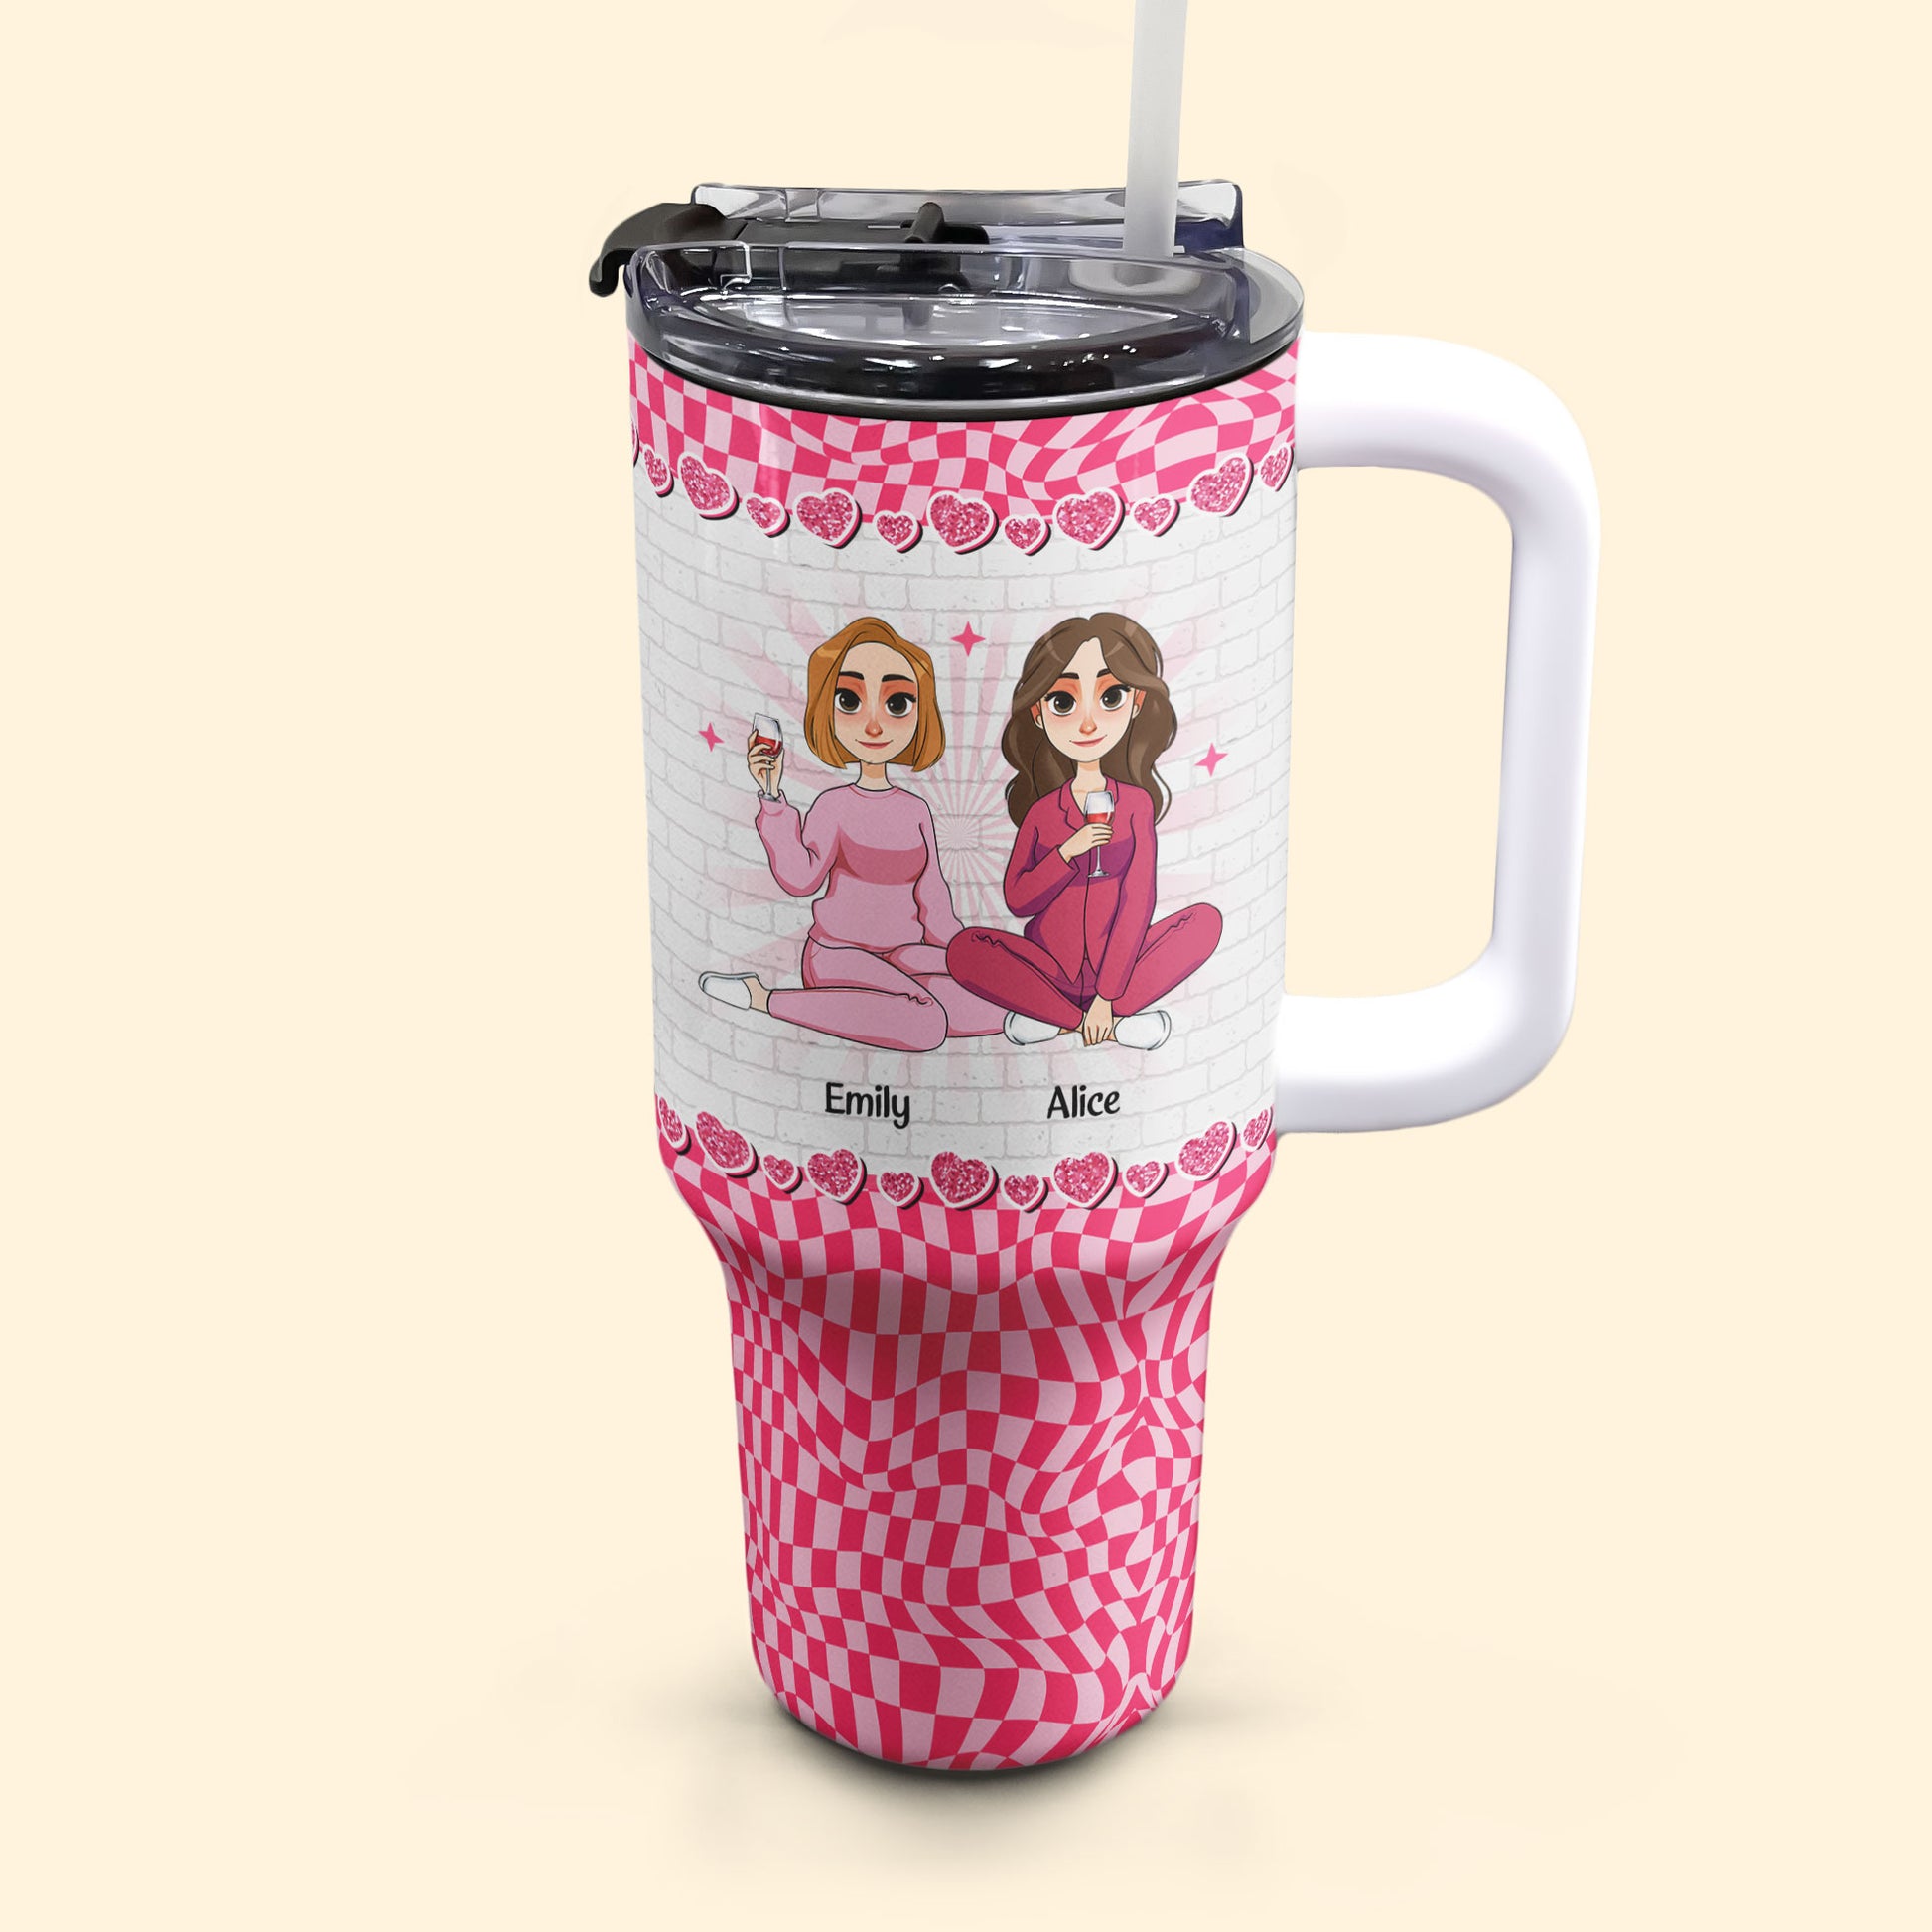 Best Bitches,Alcohol Tolerating, Bonding Over - Personalized 40oz Tumbler With Straw